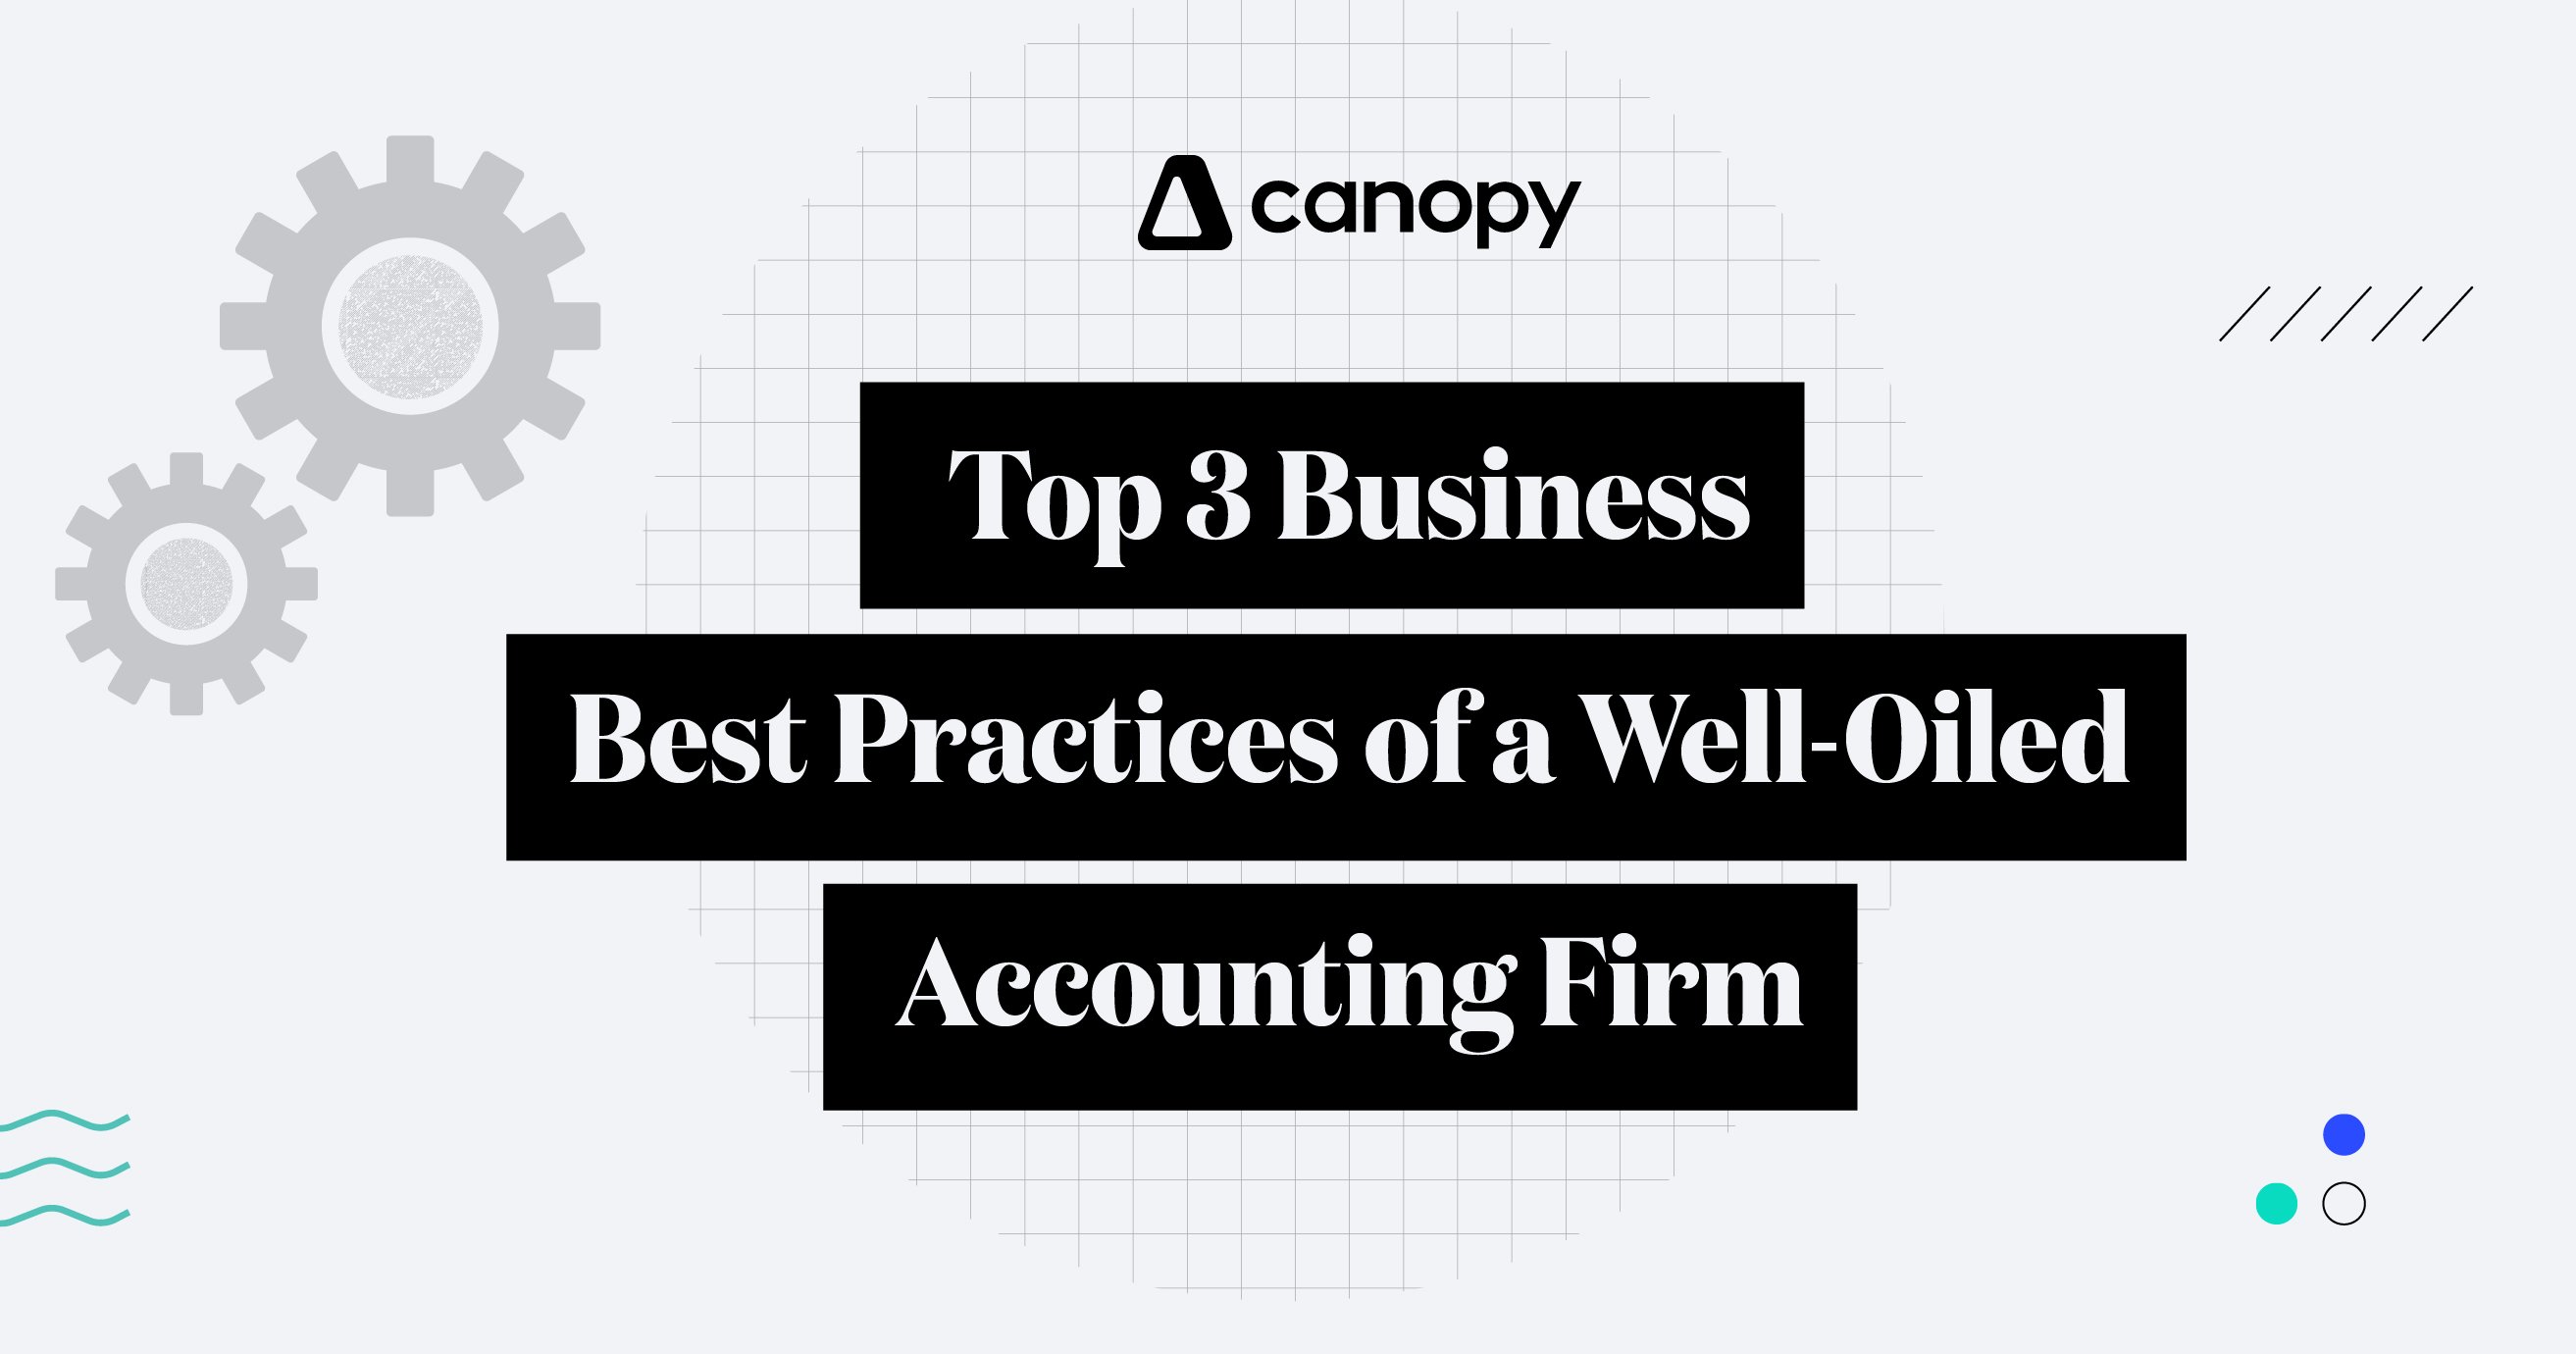 Top 3 Business Best Practices of a Well-Oiled Accounting Firm